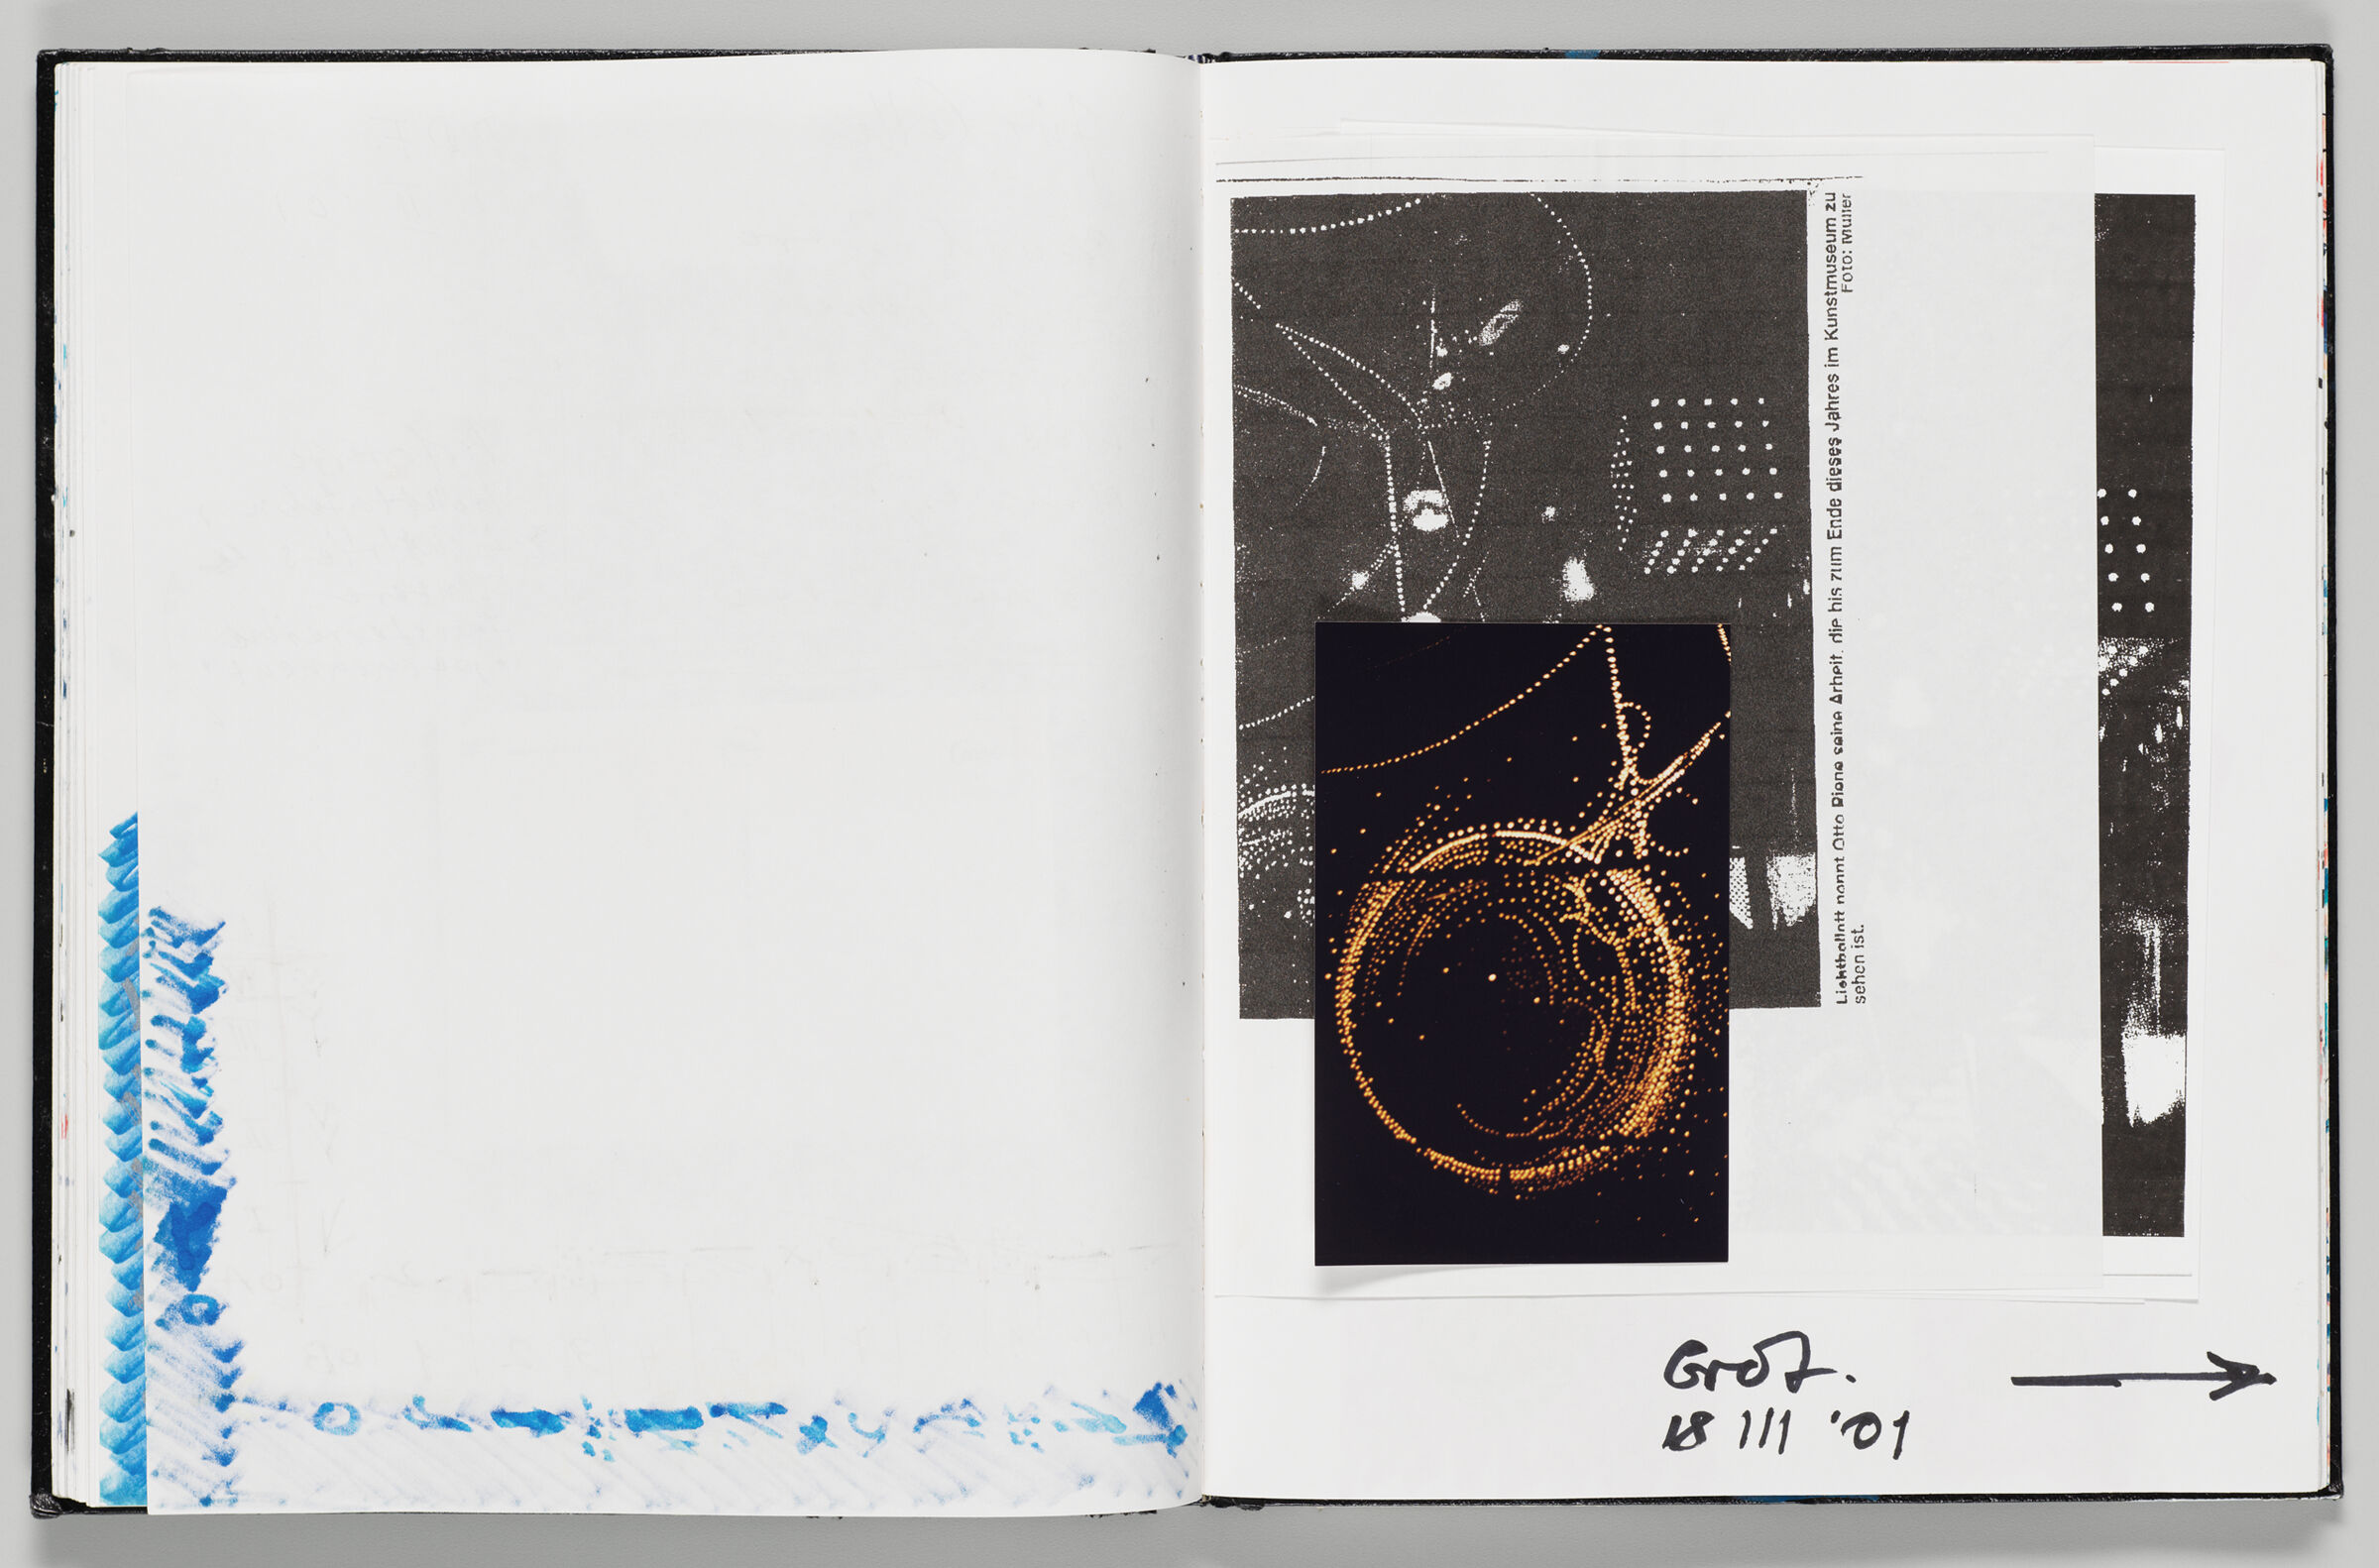 Untitled (Bleed-Through From Previous Page, Left Page); Untitled (Photograph, Adhered Photocopies, Fax From Heinz Mack, Note, And Bleed-Through From Following Page, Right Page)